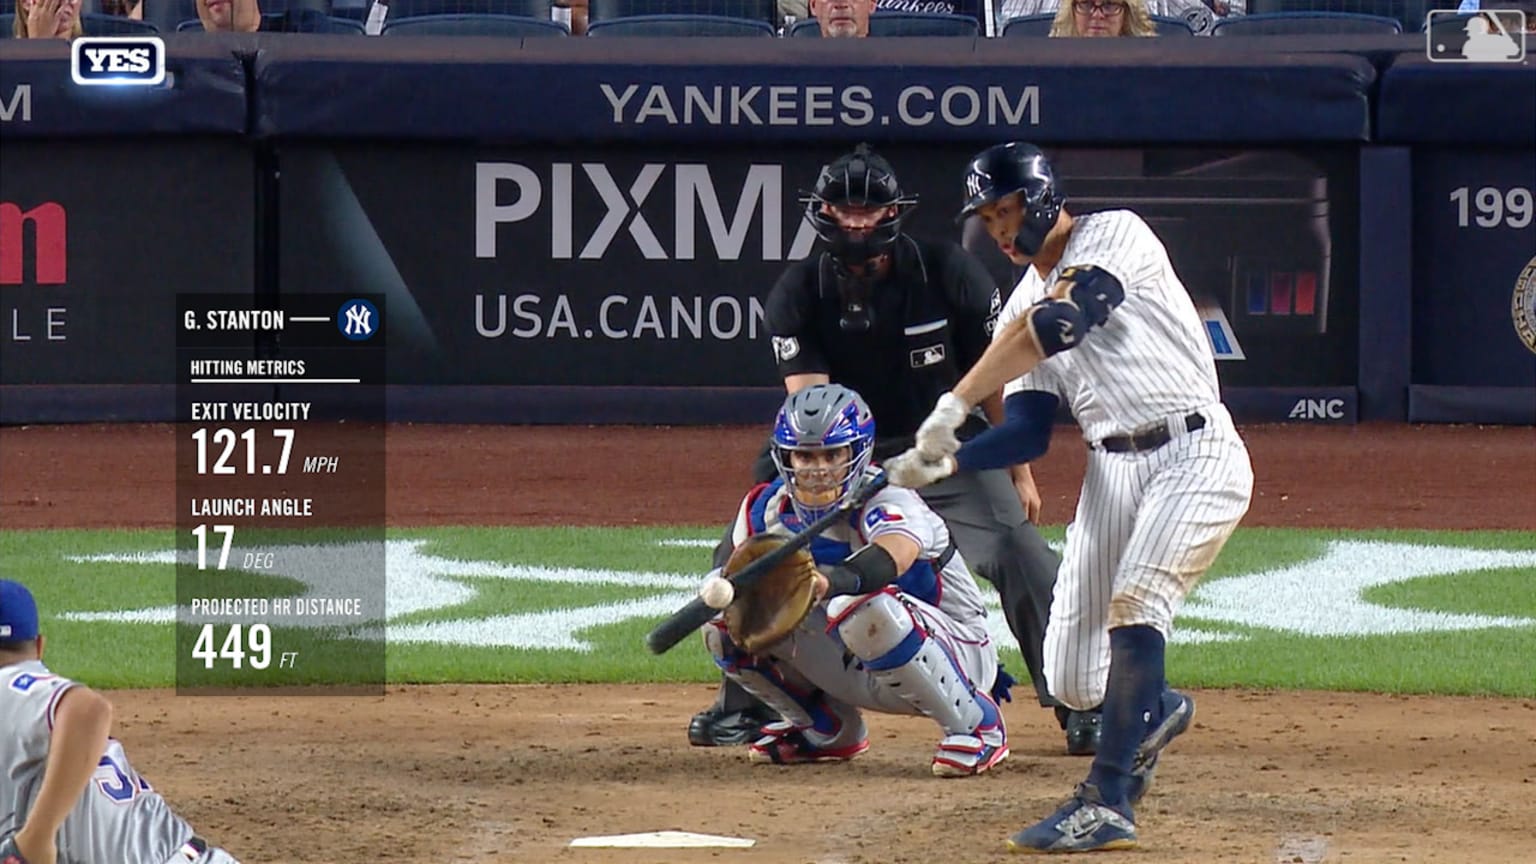 Giancarlo Stanton hits hardest home run clocked by Statcast in Yankees win